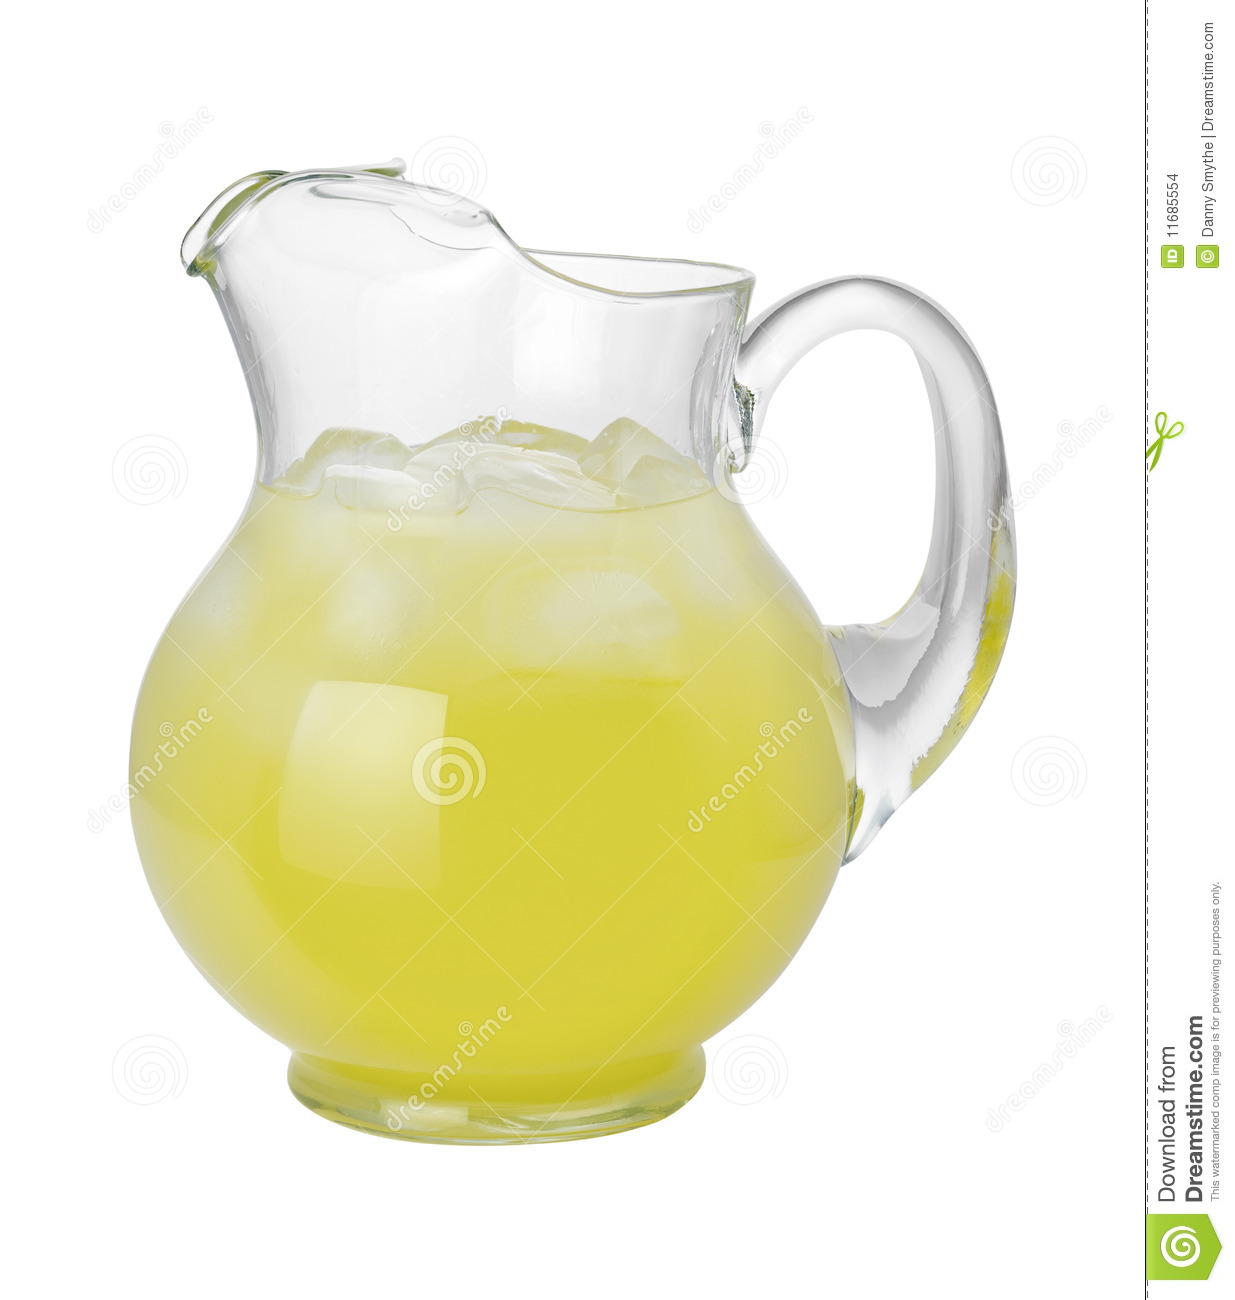 Lemonade Pitcher With A Clipping Path Isolated On White Isolation Is    